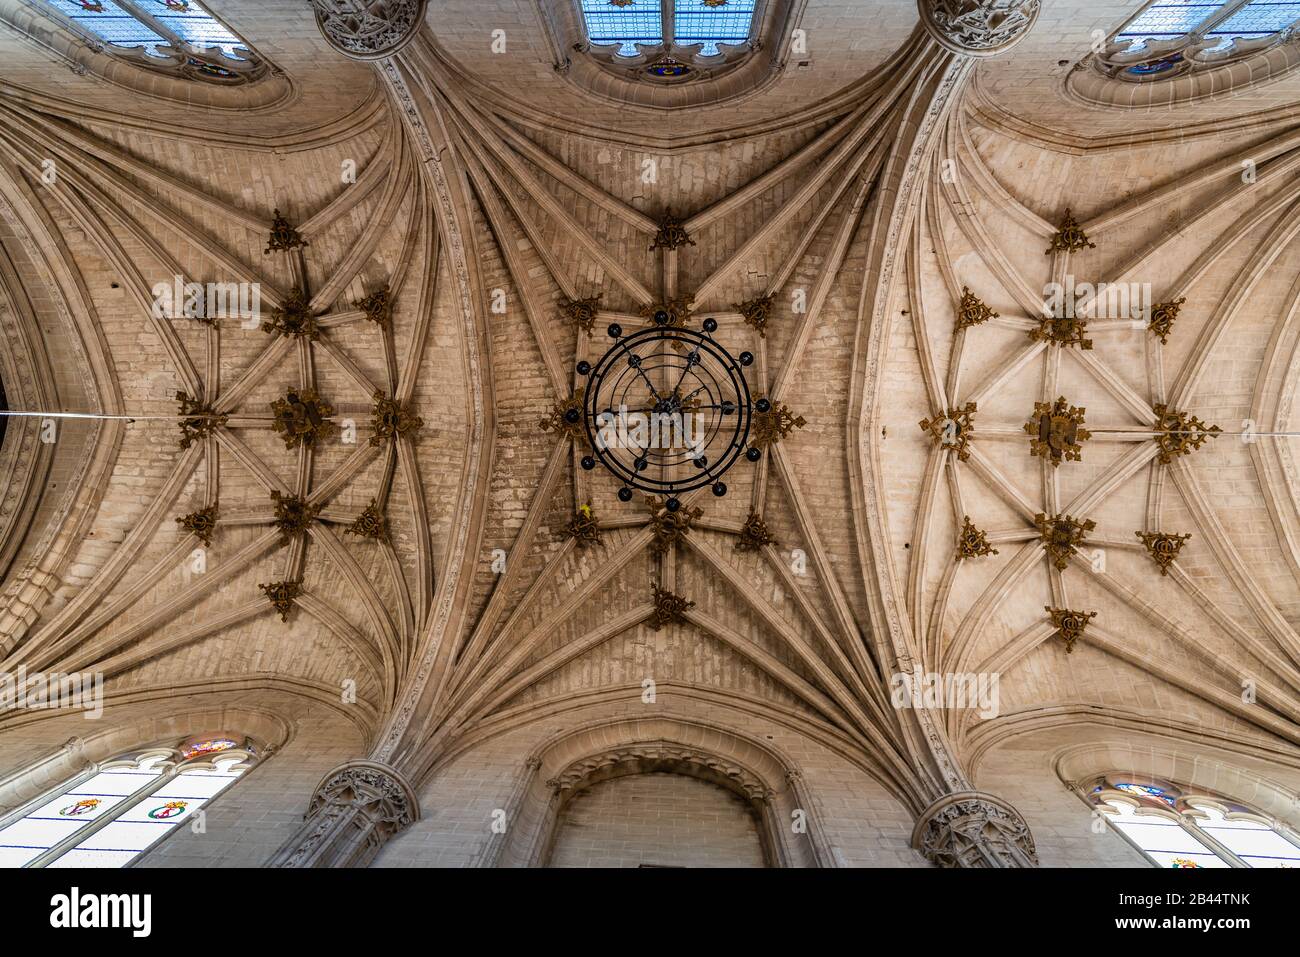 Toledo, Spain - December 6, 2019: Interior view of the church of the Monastery of San Juan de los Reyes. Directly below view of the ribbed vaults. Stock Photo